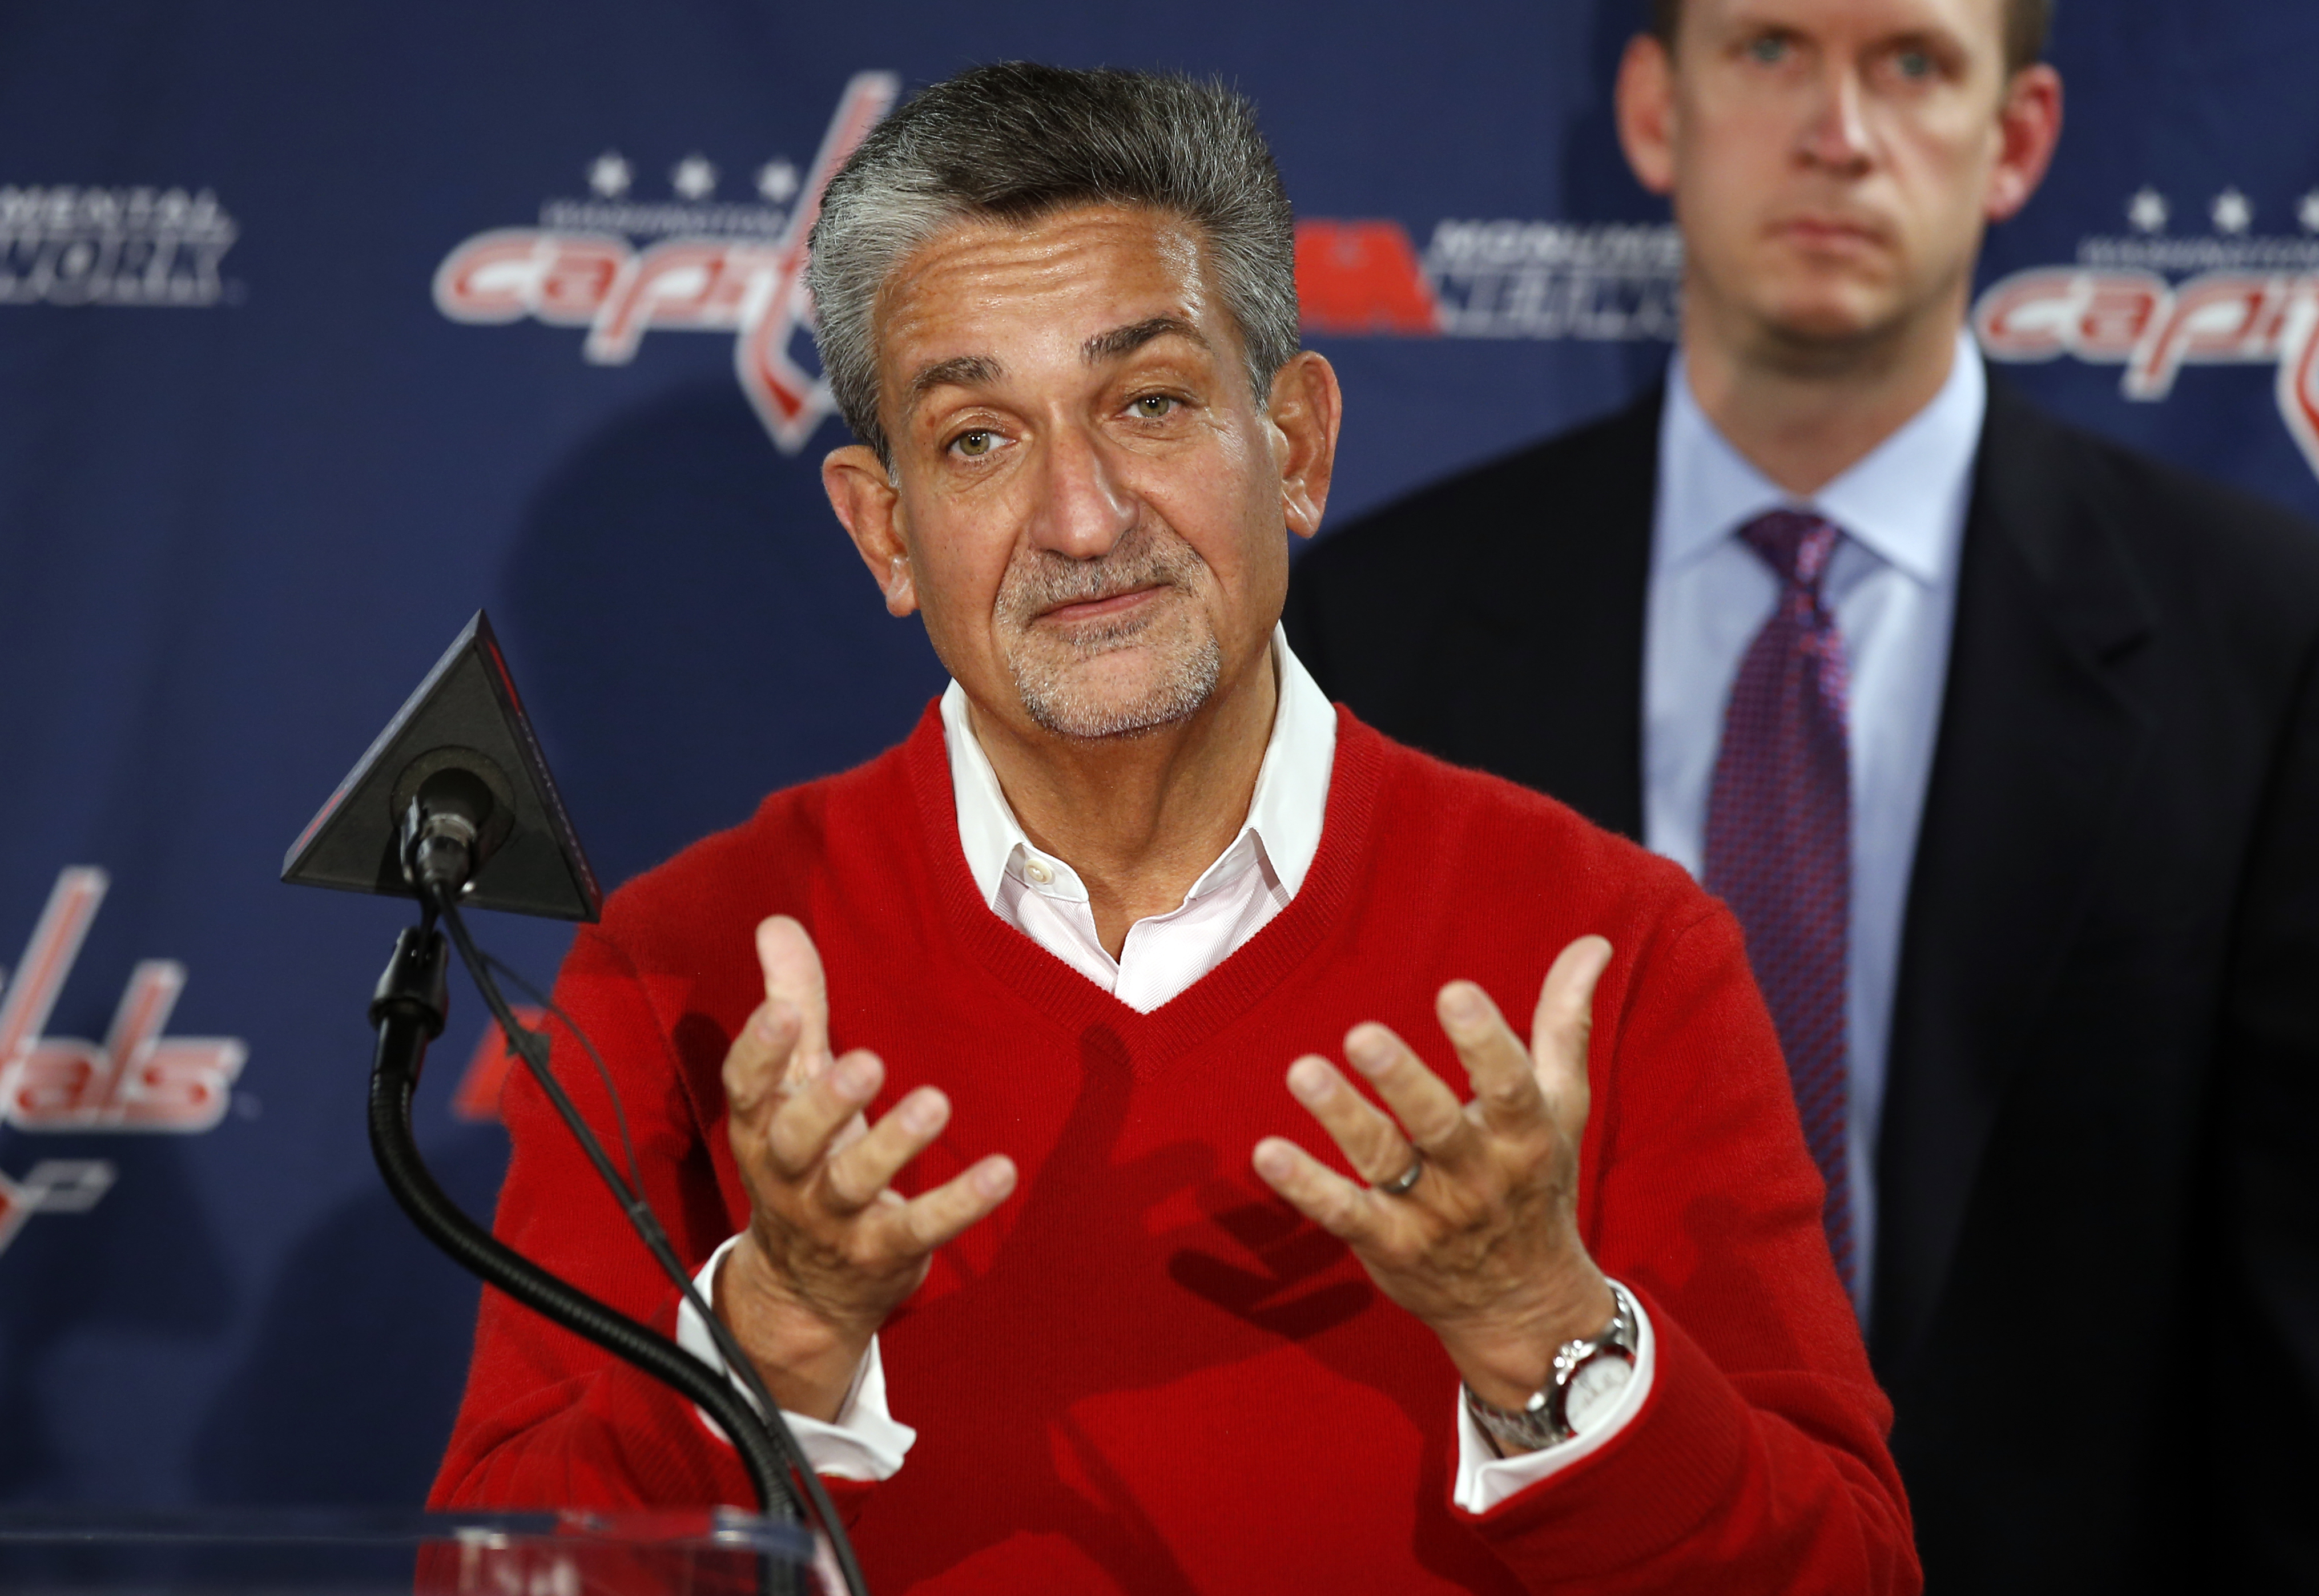 Caps’ owner Leonsis says team needs to stay focused